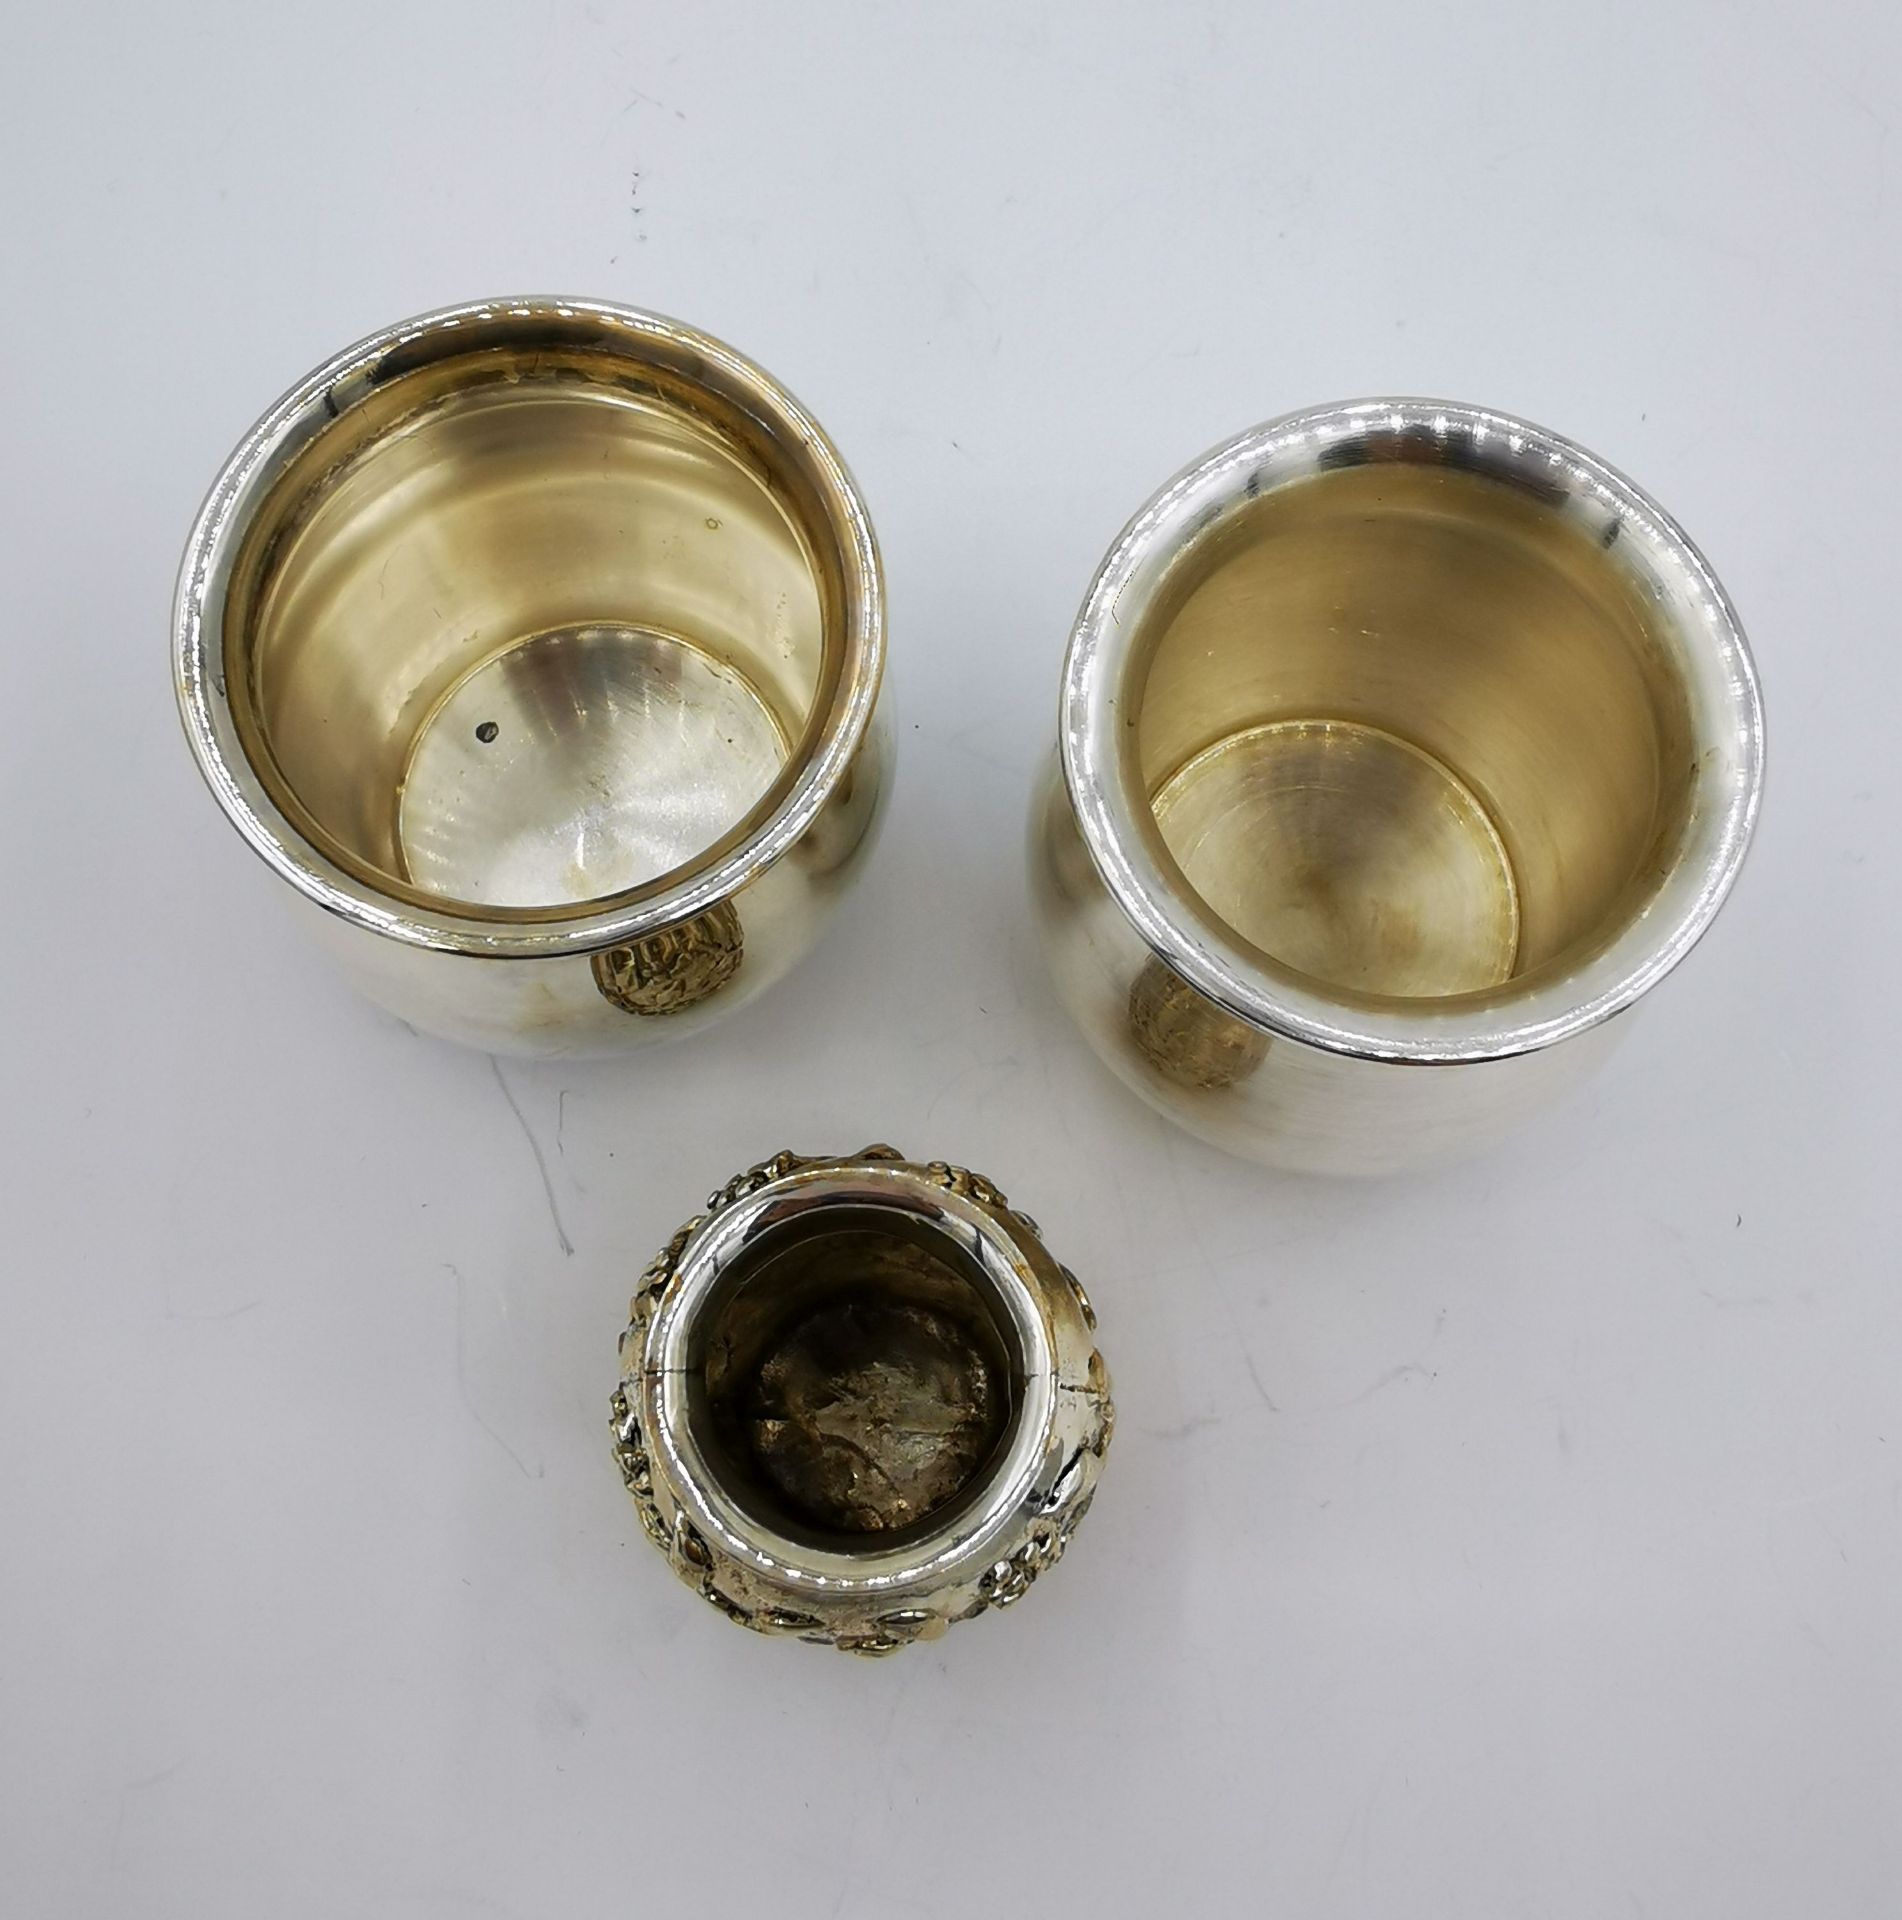 3 SMALL VASES - Image 5 of 5